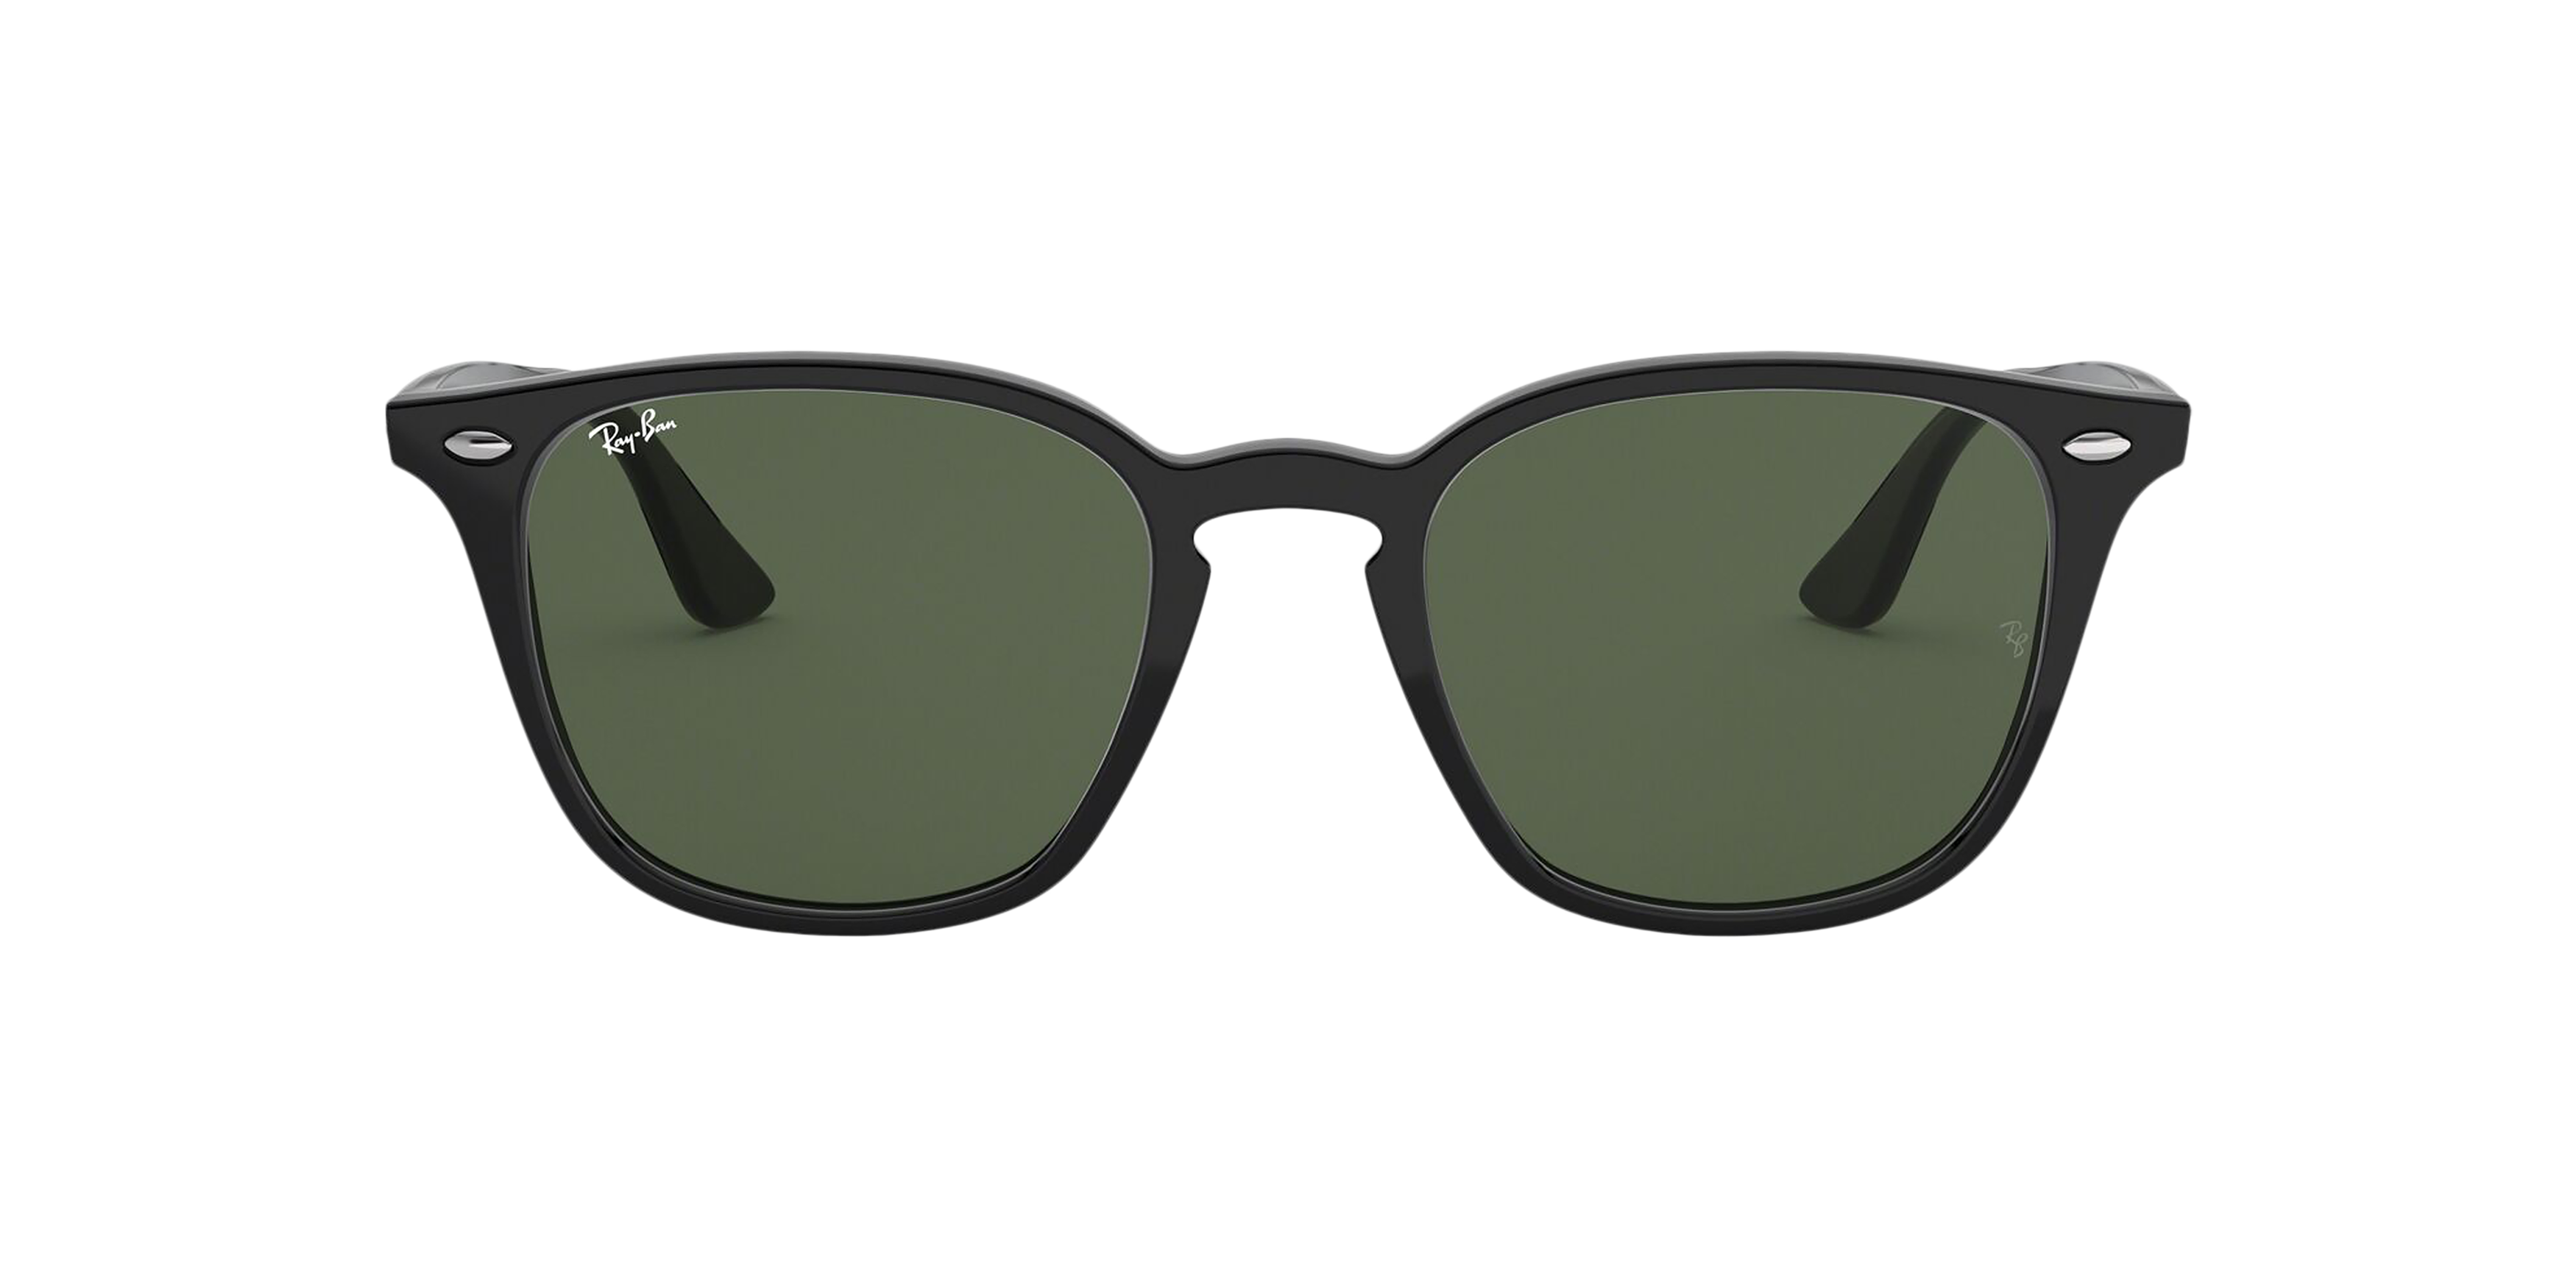 [products.image.front] Ray-Ban RB4258 601/71